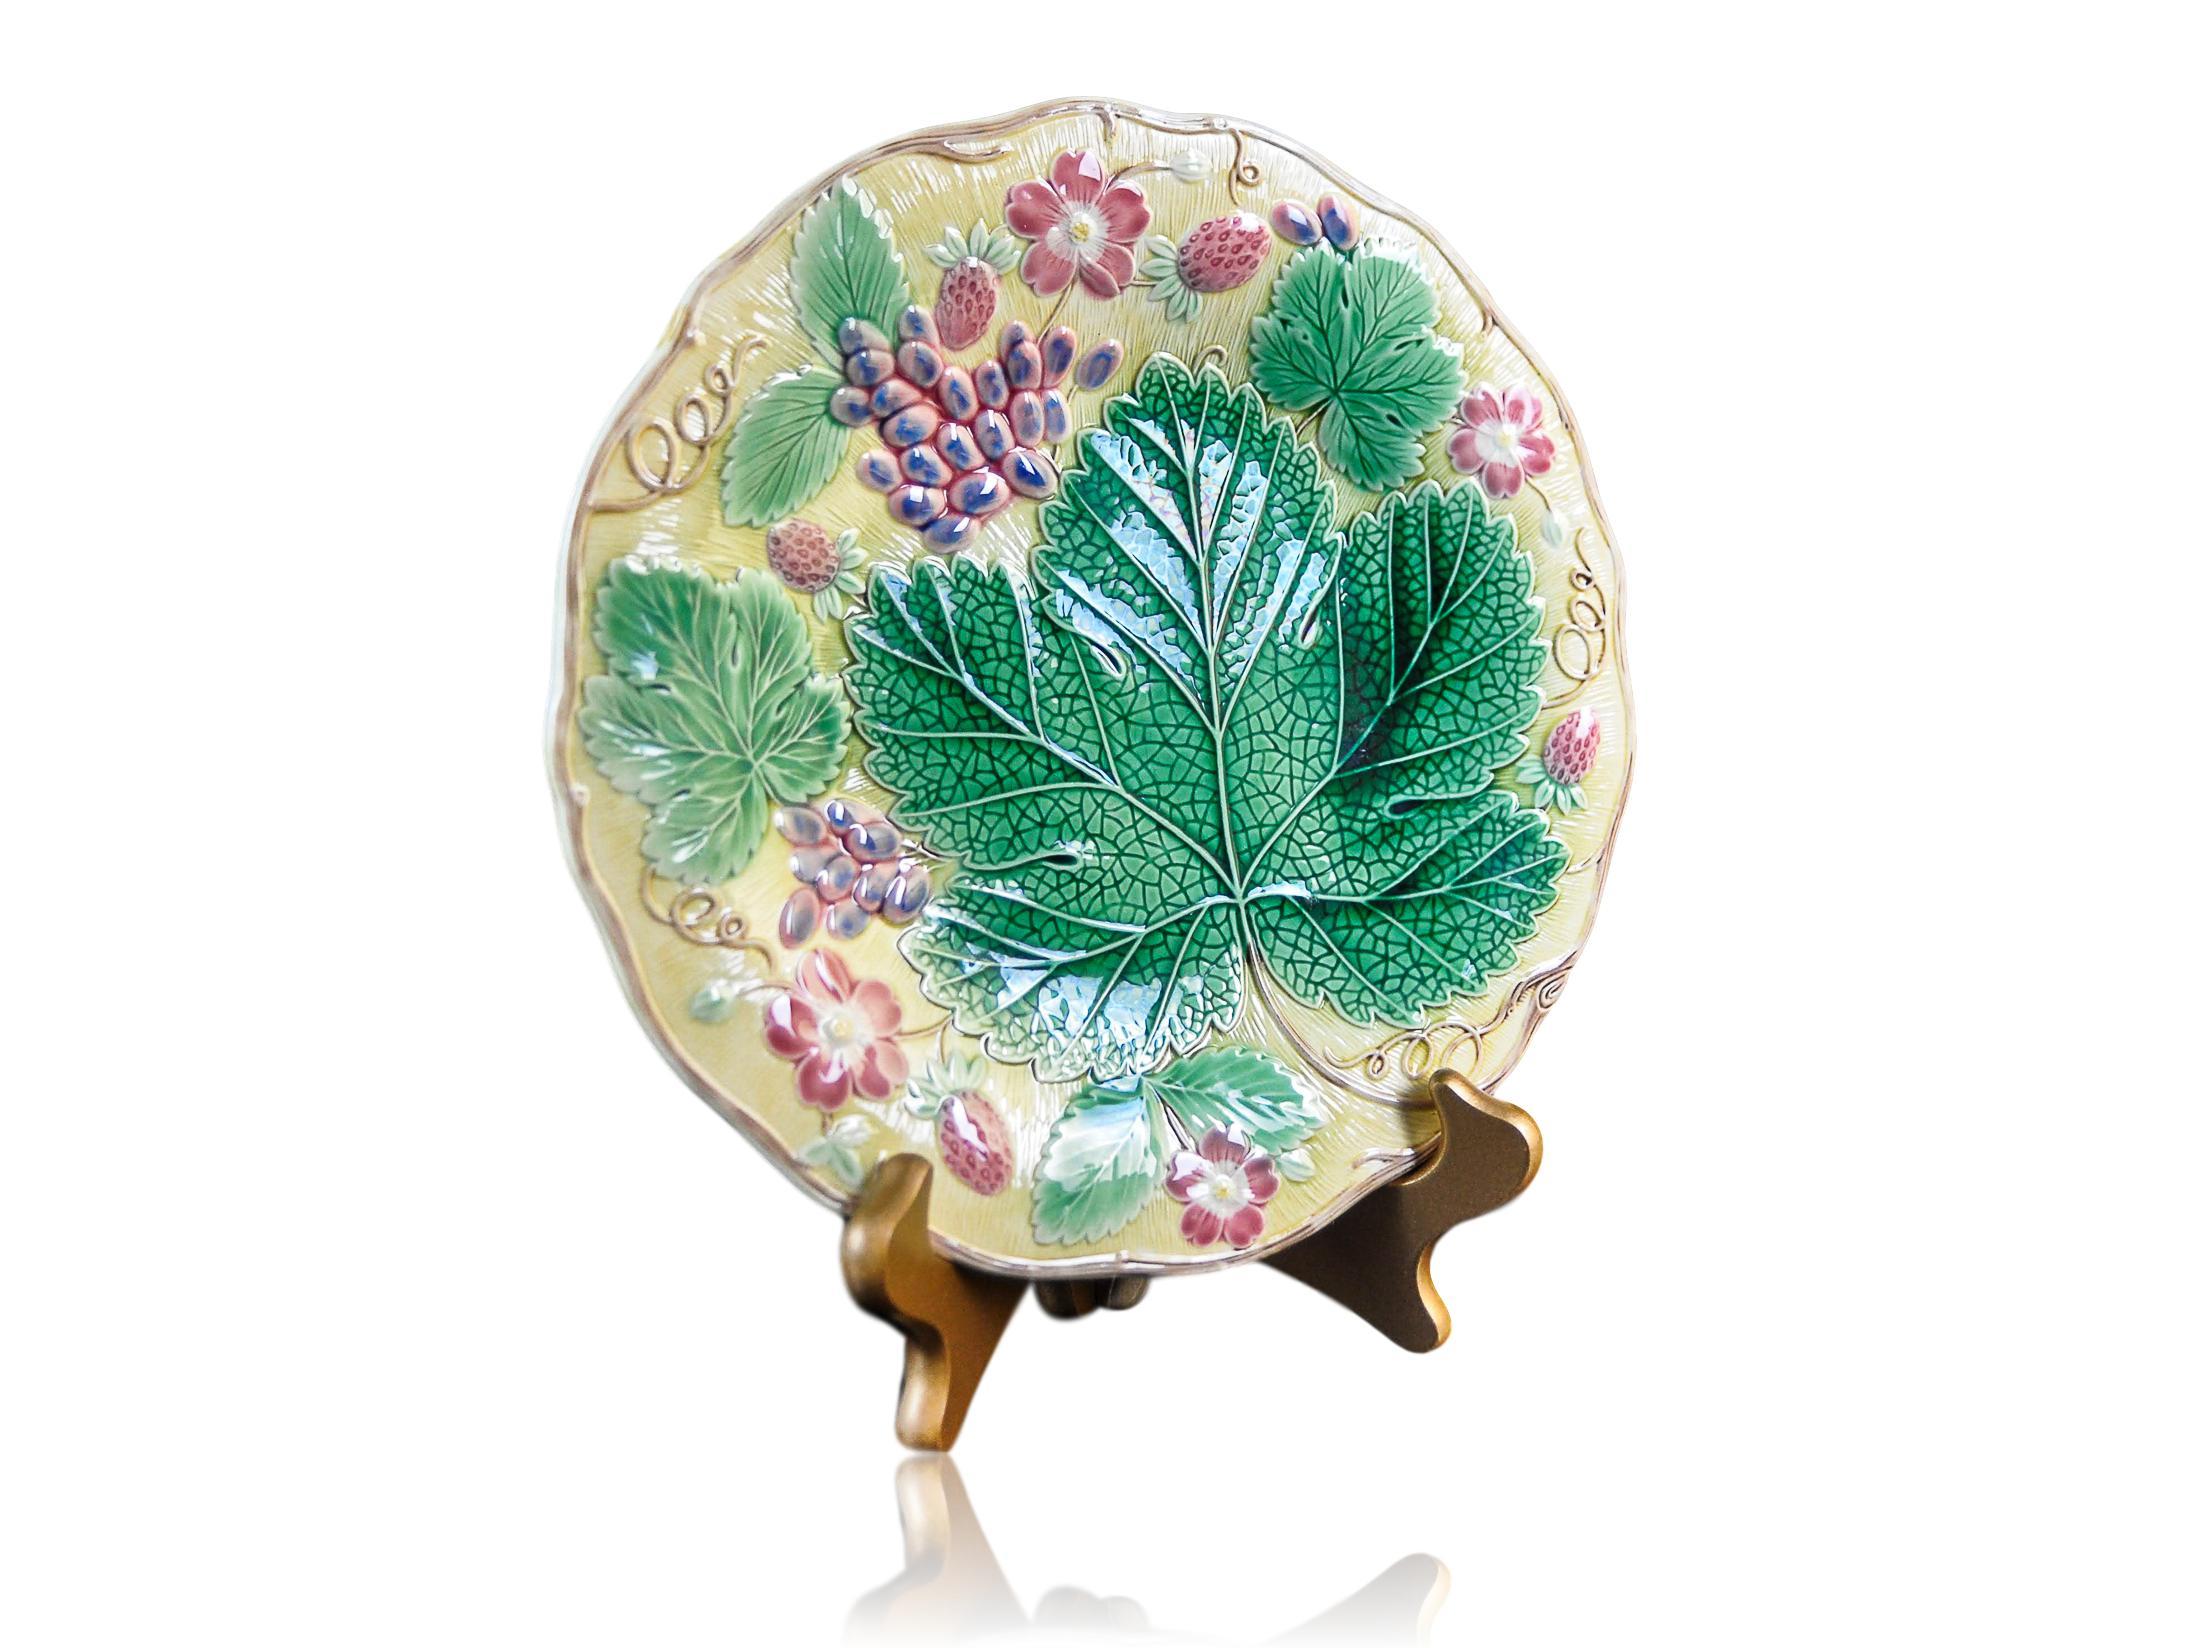 Belle Époque Wedgwood Majolica 'Vine & Strawberry' Plate, English, Dated 1929, Yellow Ground 